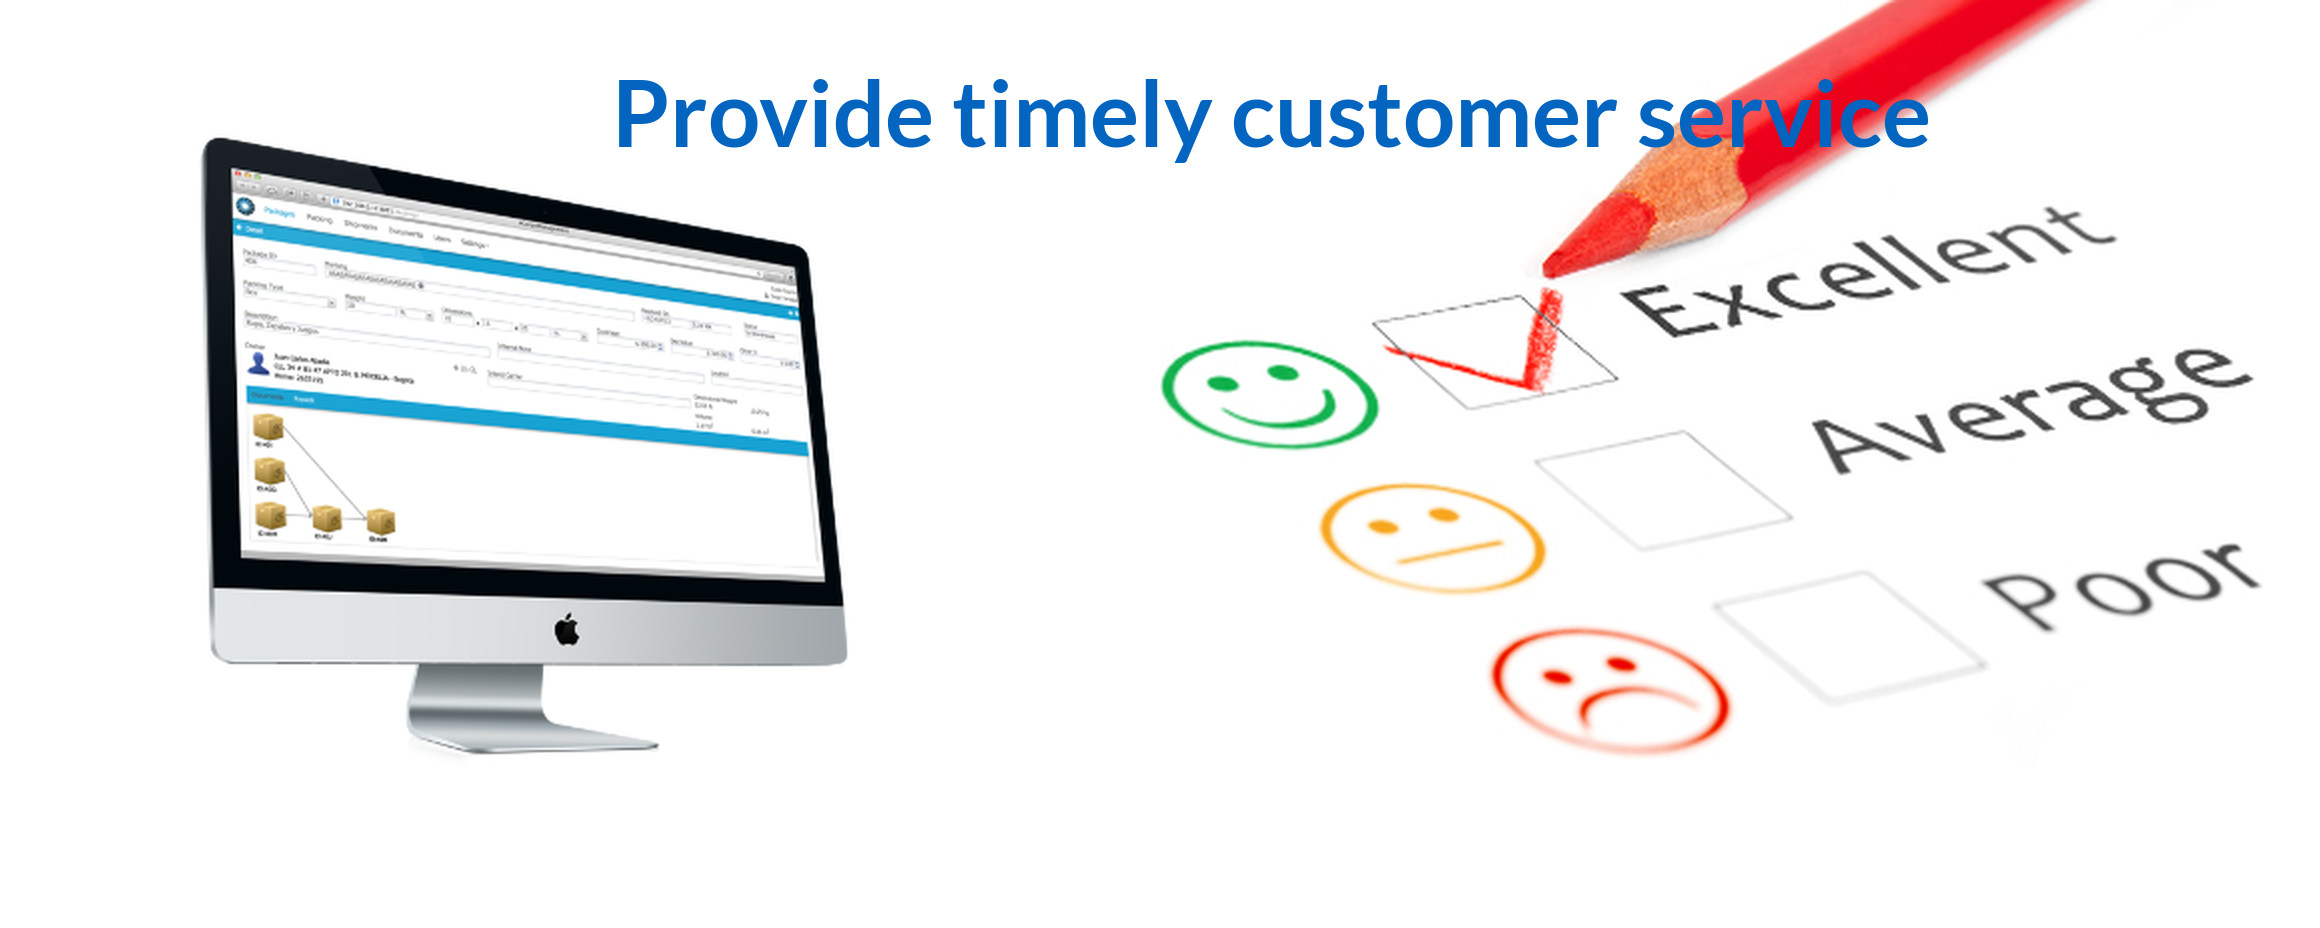 eCourierManagement provides timely customer service